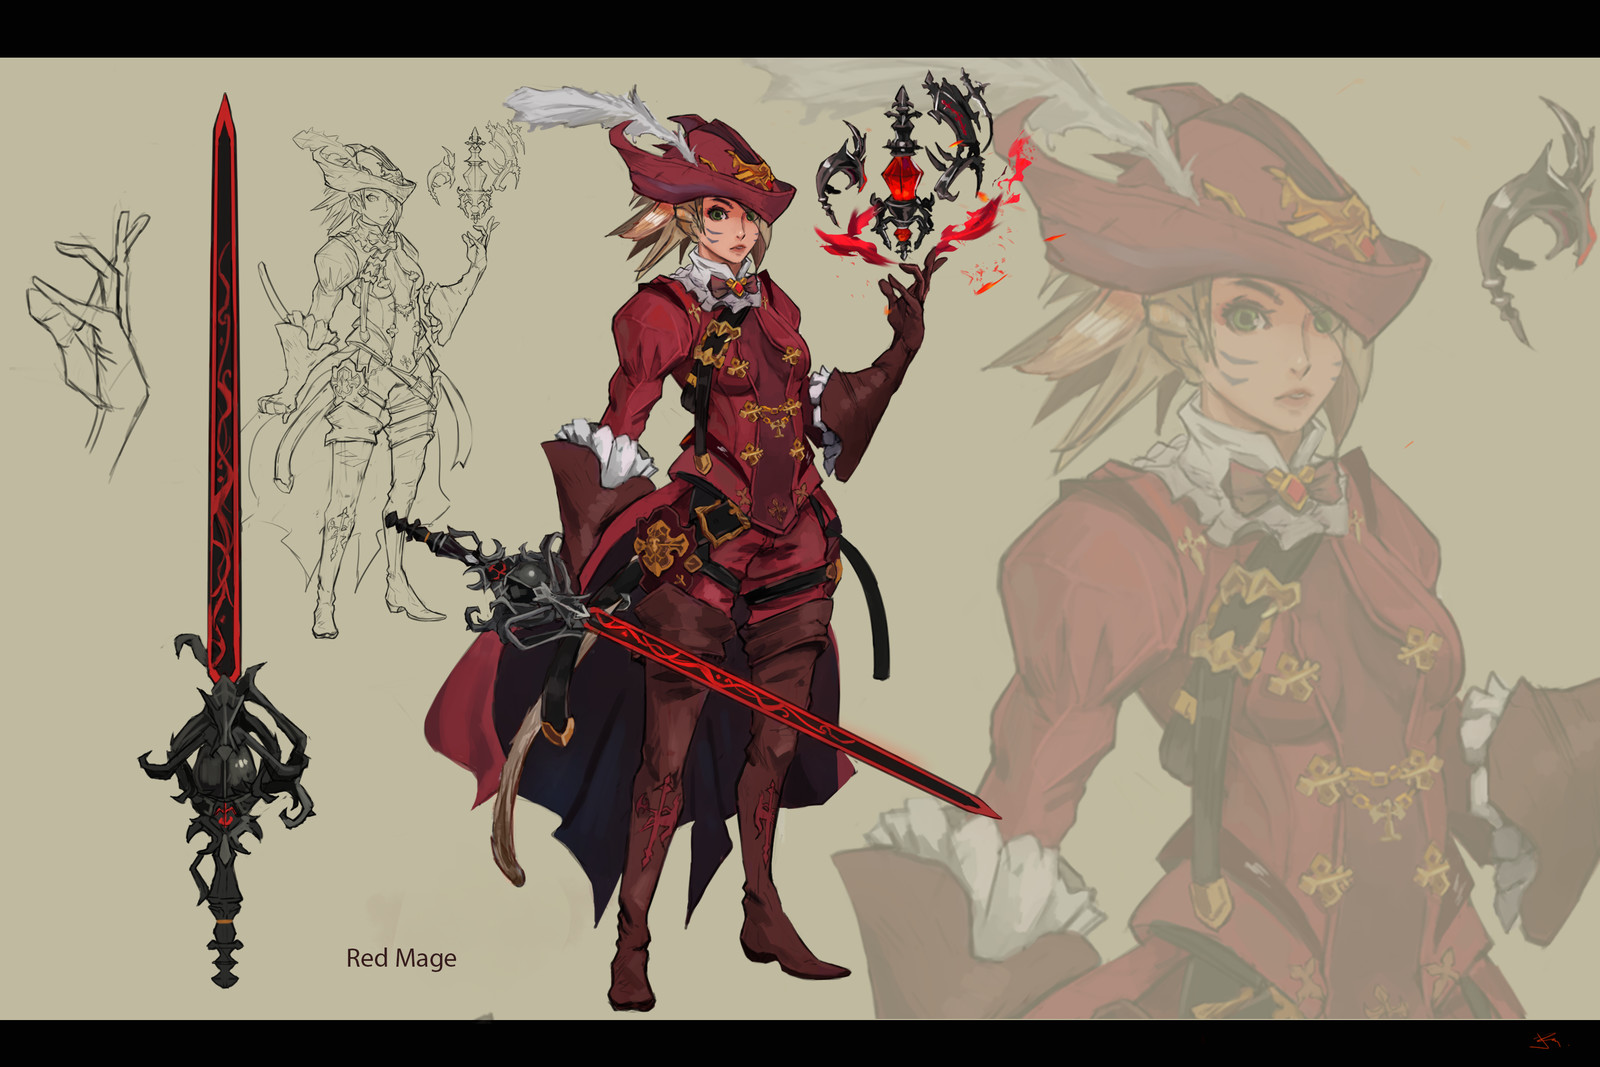 Red Mage from Final Fantasy.